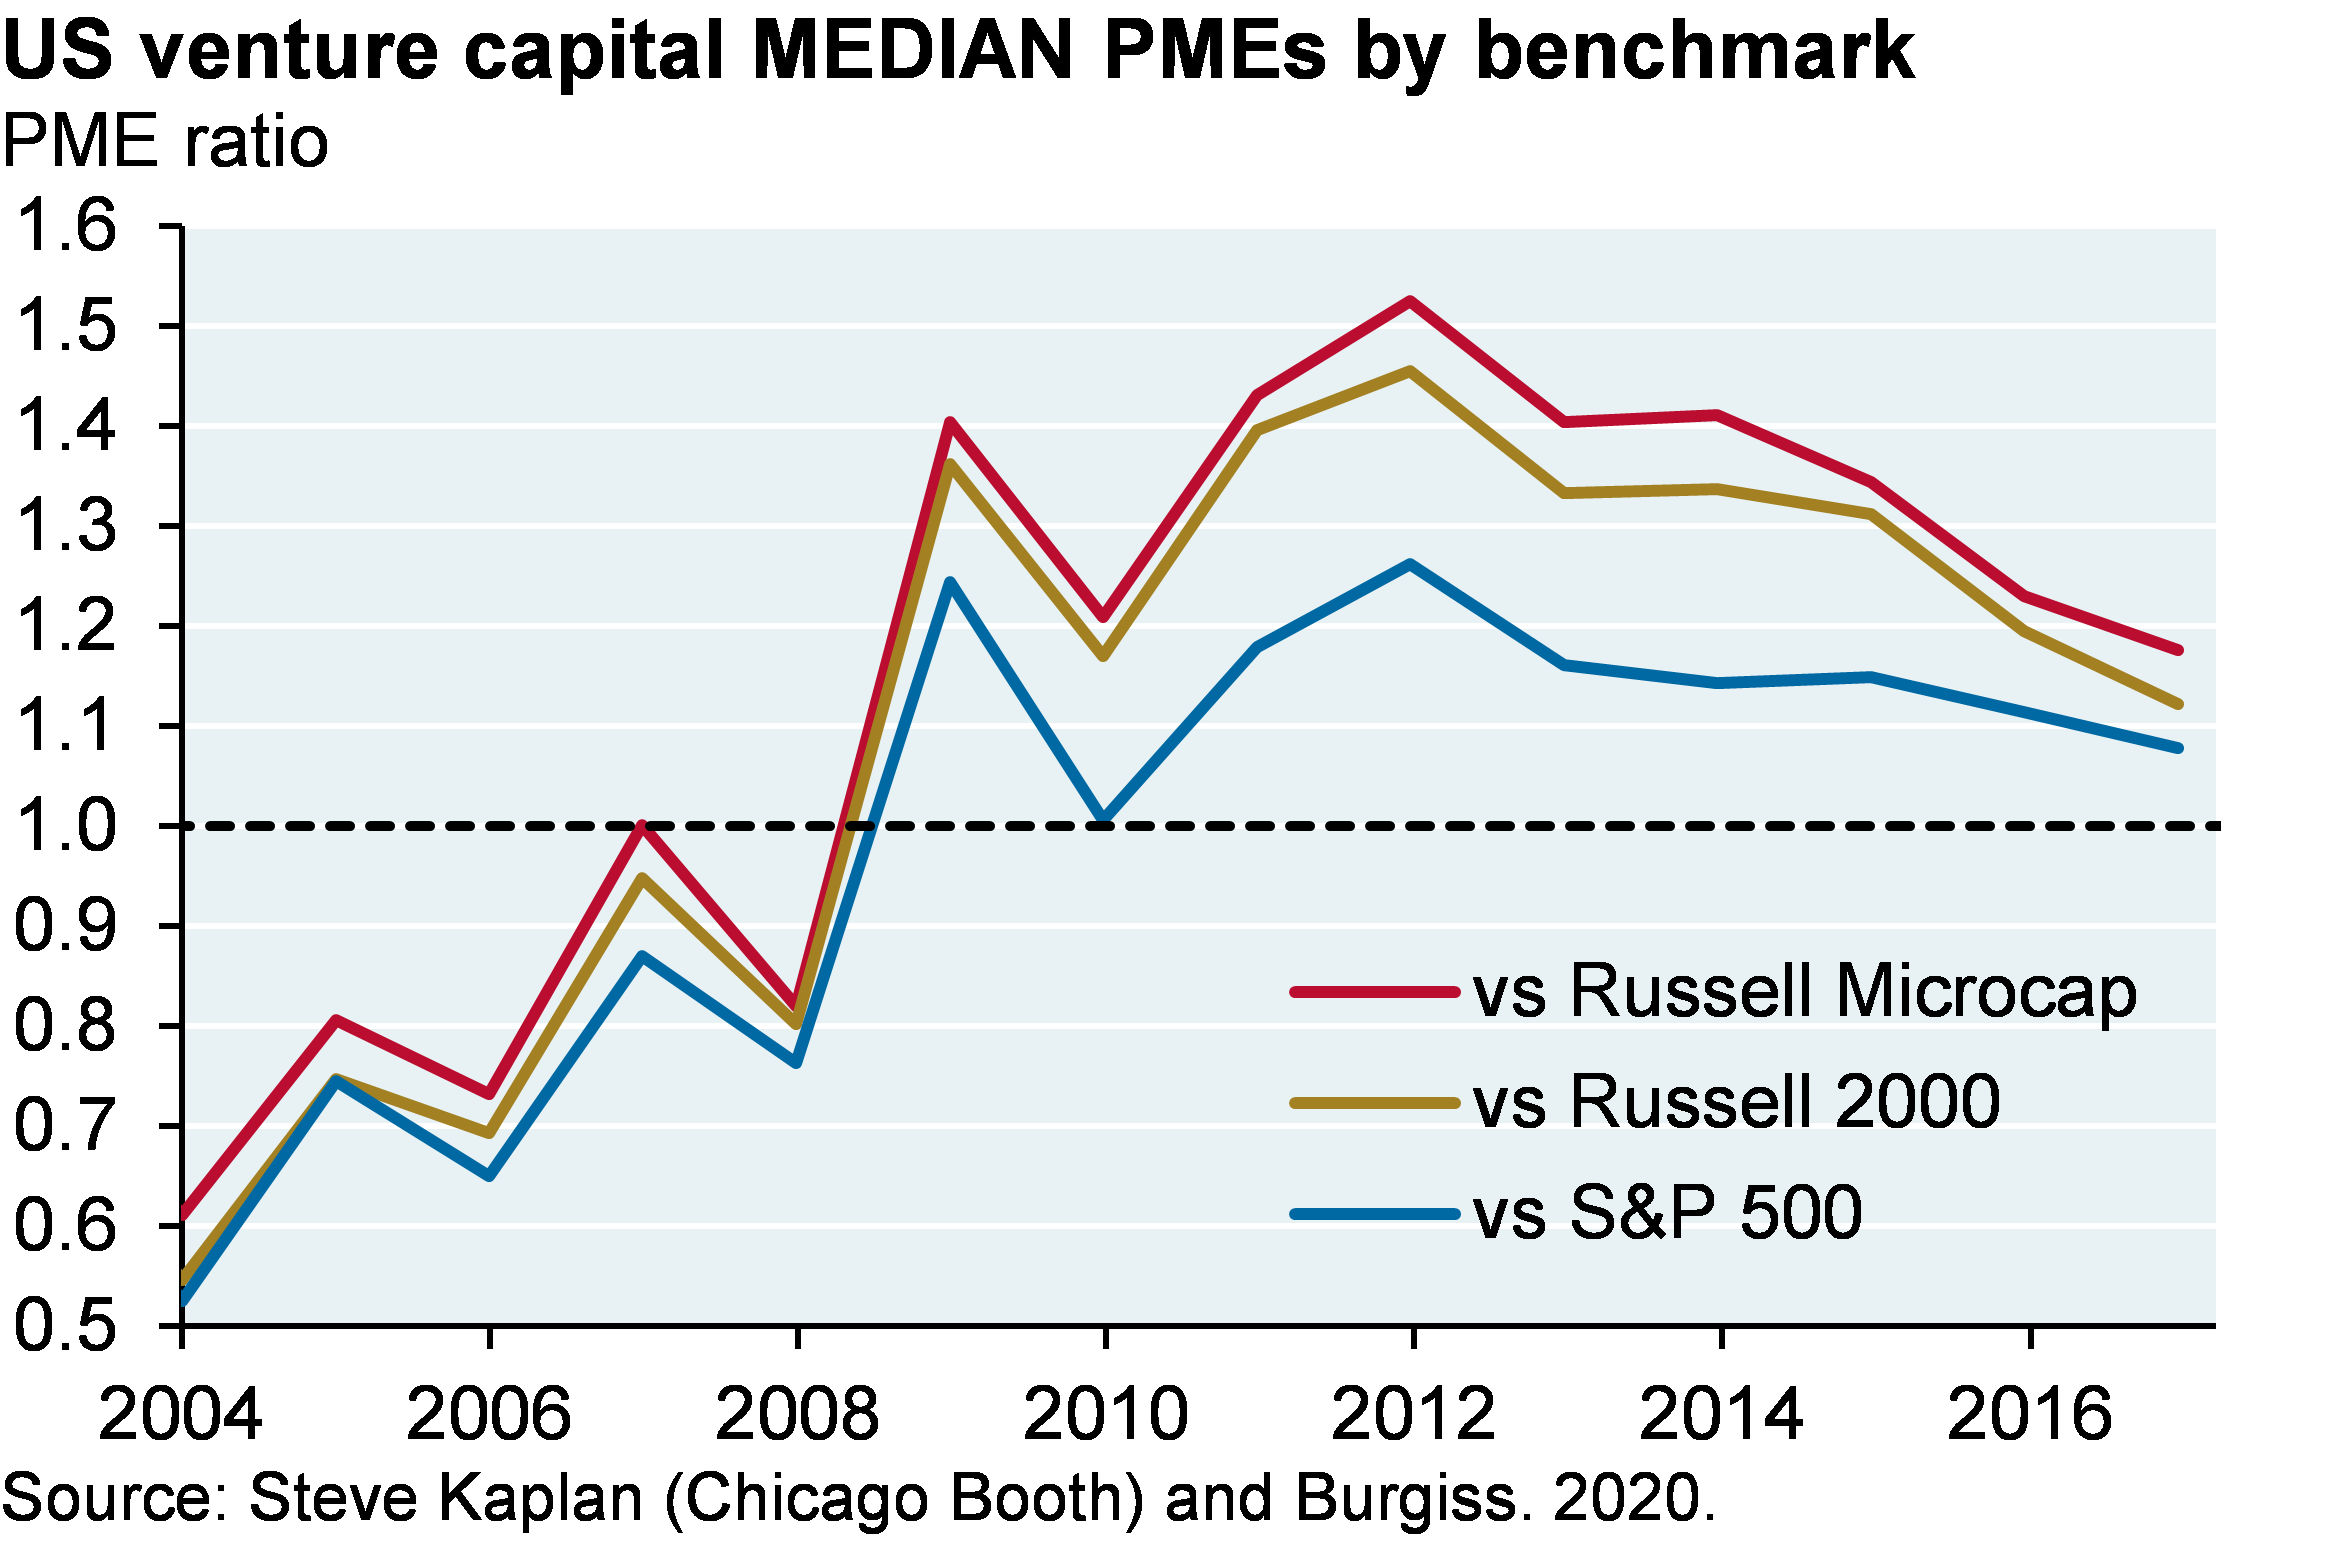 Line chart shows US venture capital median public market equivalent ratios (PME), showing the PME vs the Russell Microcap, the Russell 2000, and the S&P 500. A PME above 1 indicates that the venture capital performance outperformed the benchmark. Since 2004, the PME ratios for all benchmarks steadily increased from around 0.6 to around 1.5 in 2012. Since then the PME ratios have declined to around 1.1-1.2. Over time, the PME vs Russell Microcap has been slightly higher than the PME vs Russell 2000. There has been a wider gap between the PME vs Russell 2000 and the PME vs S&P 500. In 2012, the PME vs S&P 500 was 1.25 compared to 1.45 vs the Russell 2000. However, the gap has recently narrowed, with both the PME vs Russell 2000 and the PME vs S&P 500 at around 1.1.